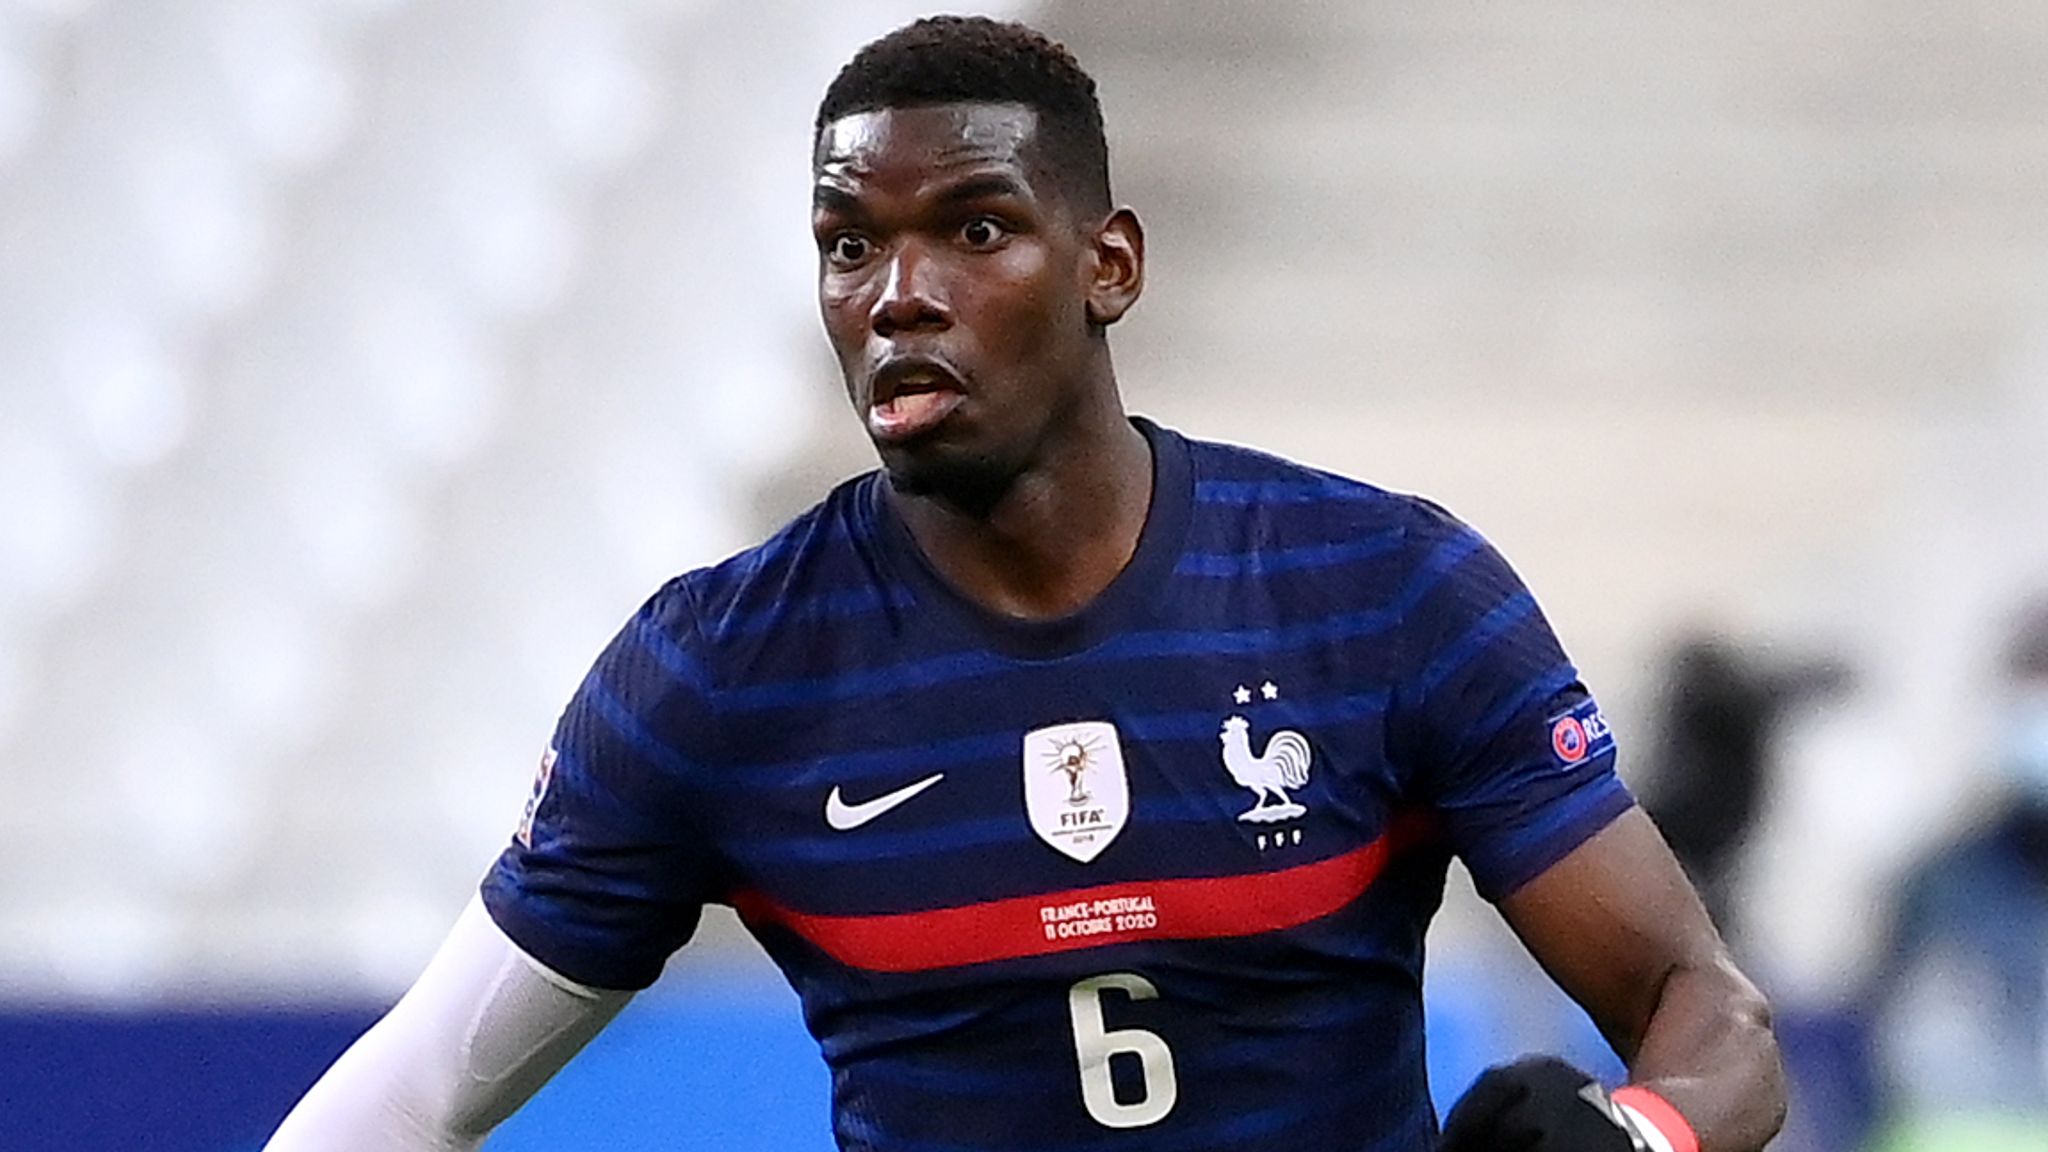 Paul Pogba Man Utd Midfielder Angry And Appalled Over Reports He Quit France Team Football News Sky Sports